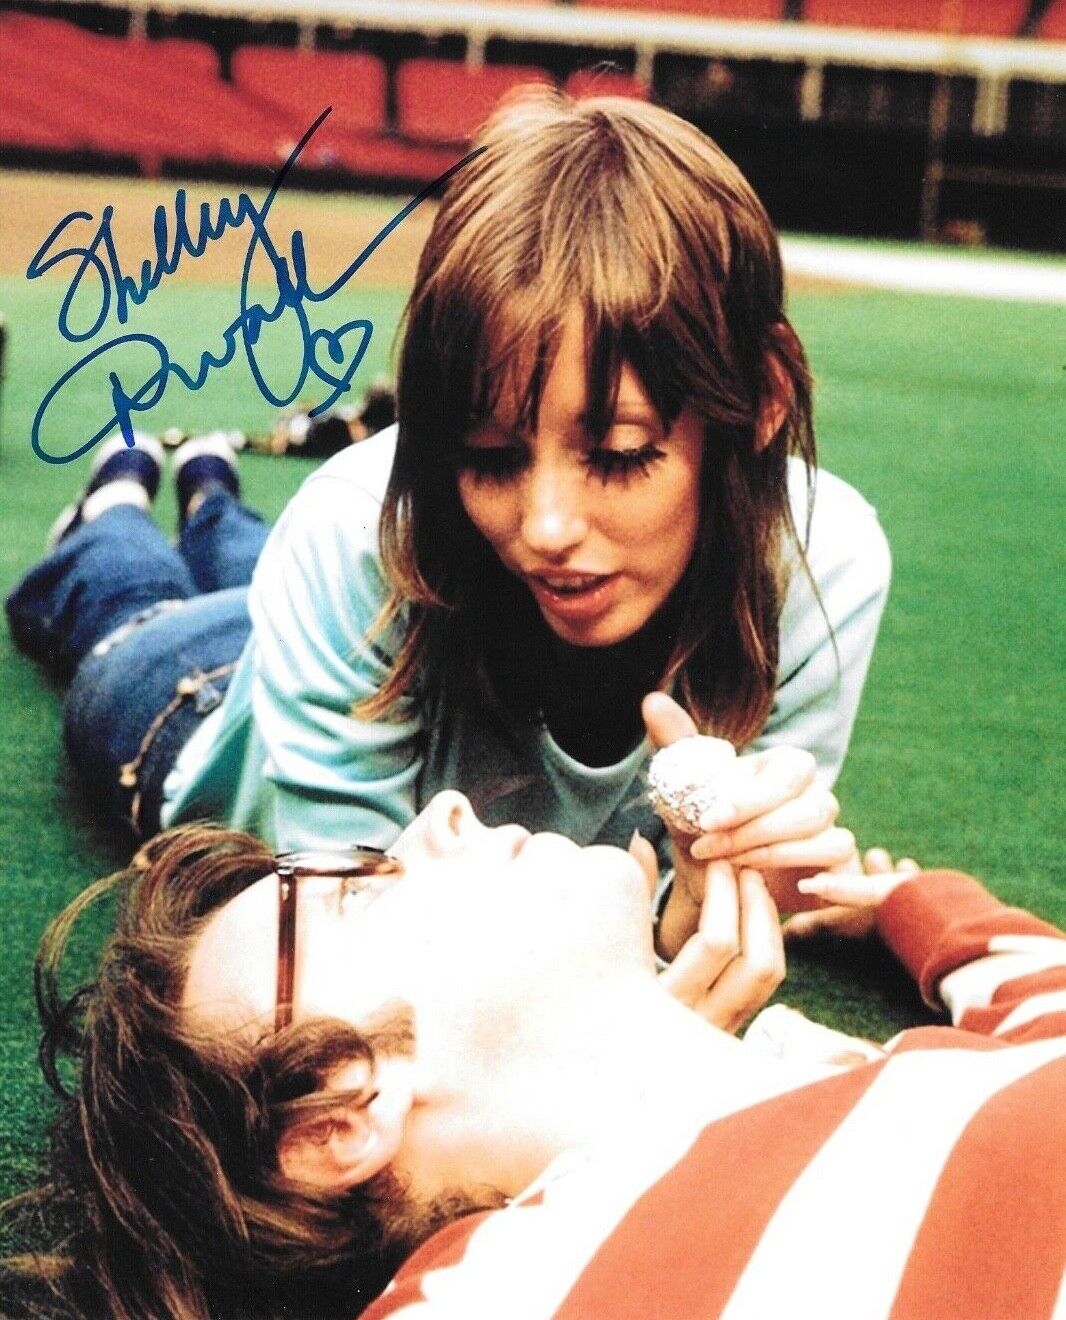 * SHELLEY DUVALL * signed 8x10 Photo Poster painting * BREWSTER McCLOUD * COA * 2